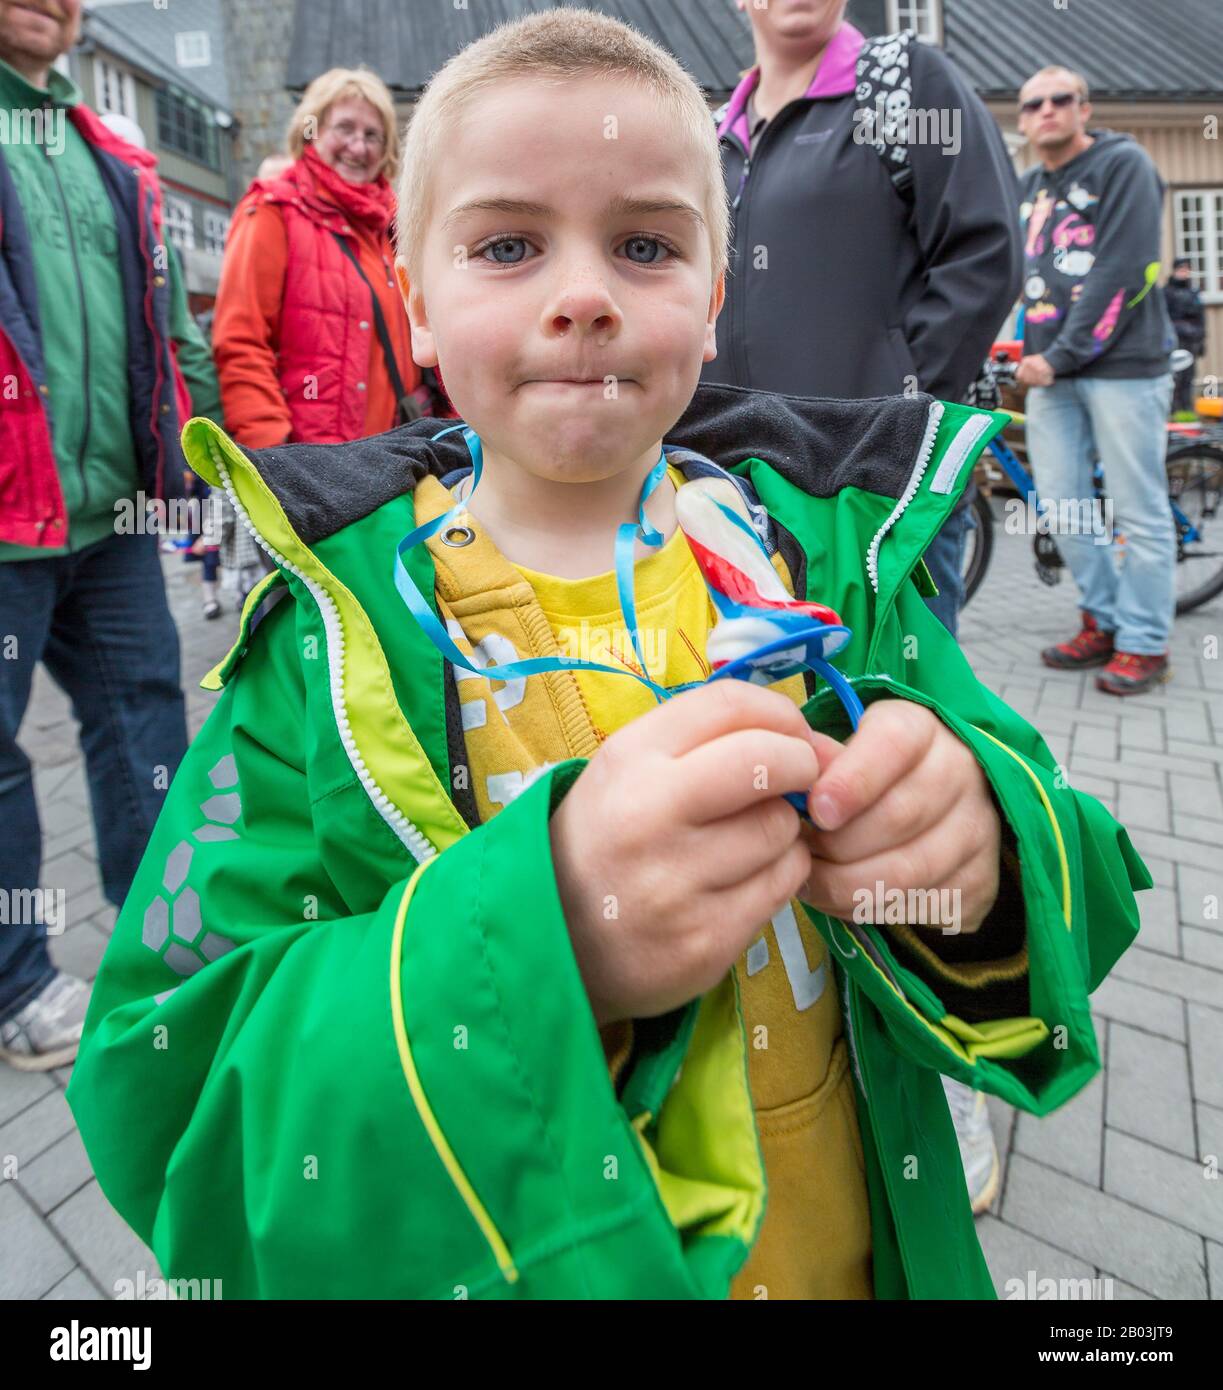 Boy with candy and runny nose, summer festival, Reykjavik, Iceland Stock Photo